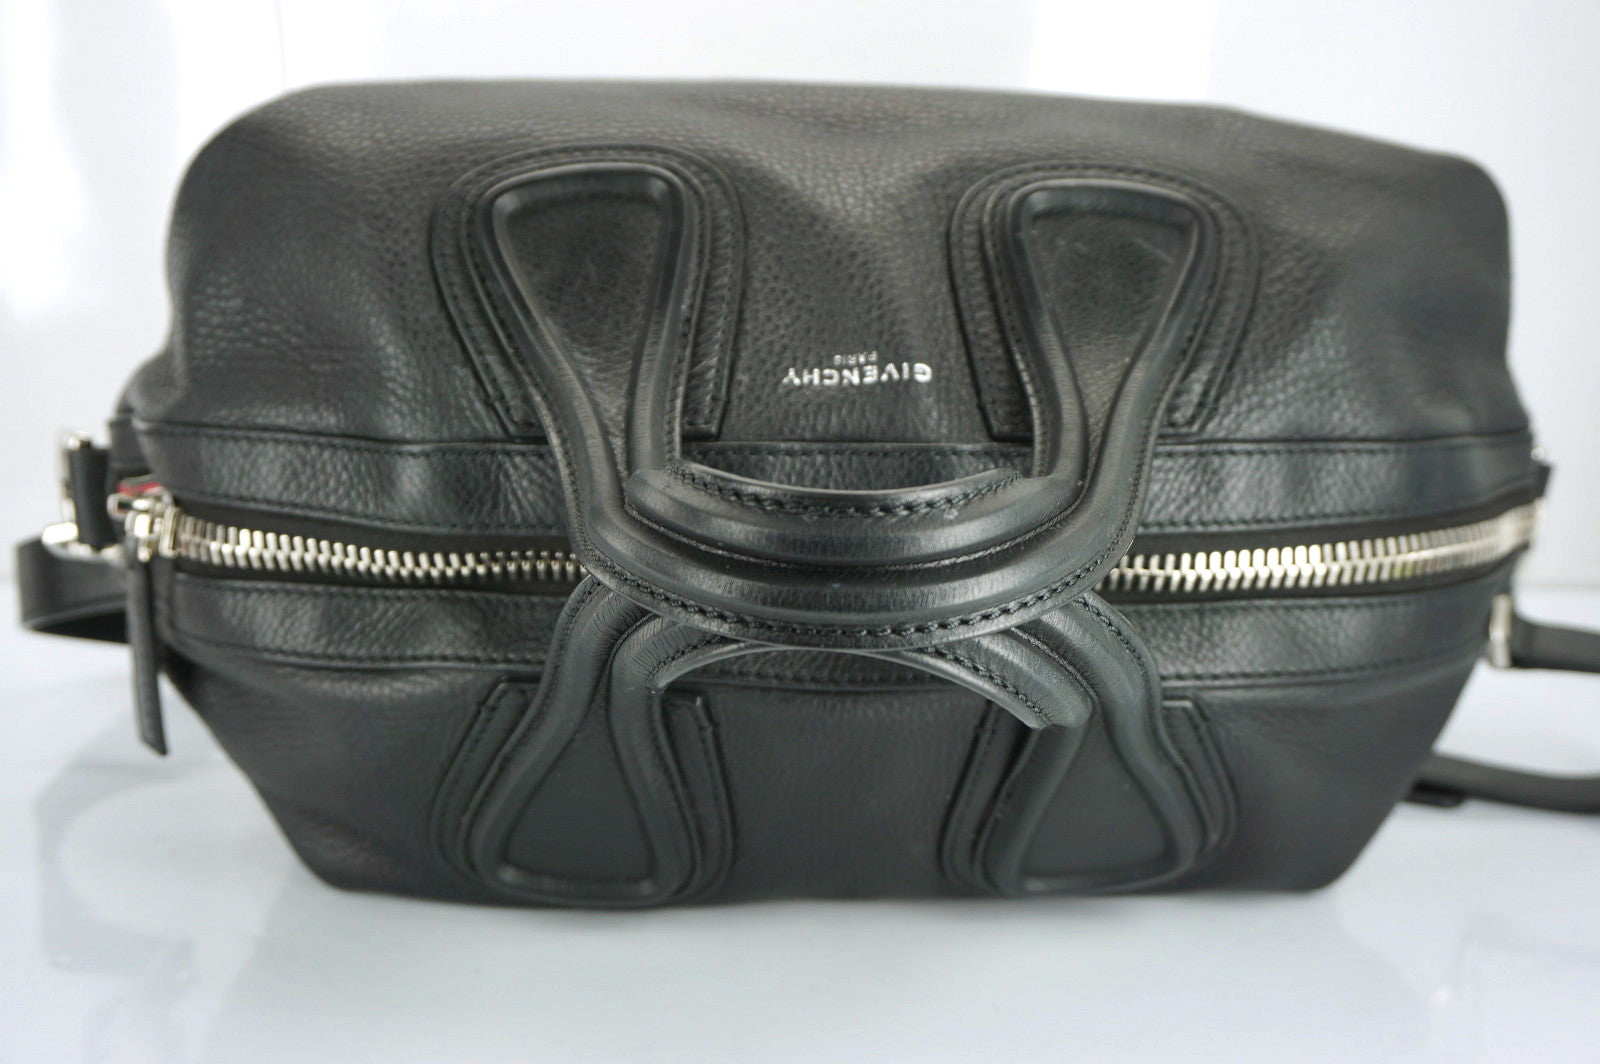 Givenchy Black Leather Nightengale Medium Waxy Satchel Shoulder Bag $2450 New